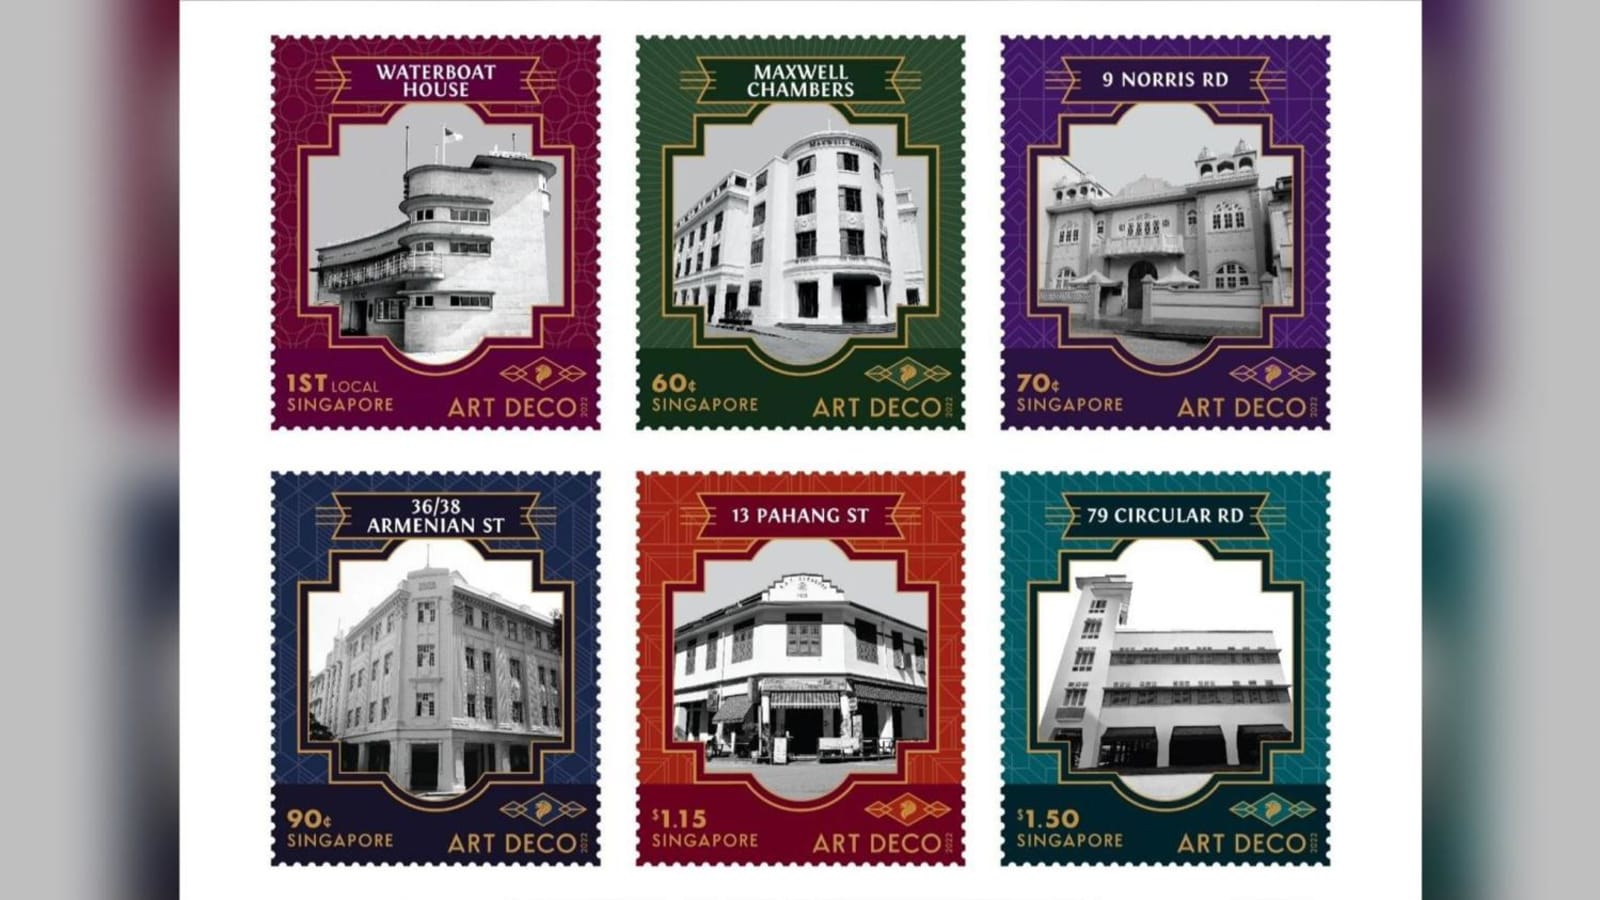 singpost-issues-stamps-featuring-art-deco-heritage-buildings-in-singapore